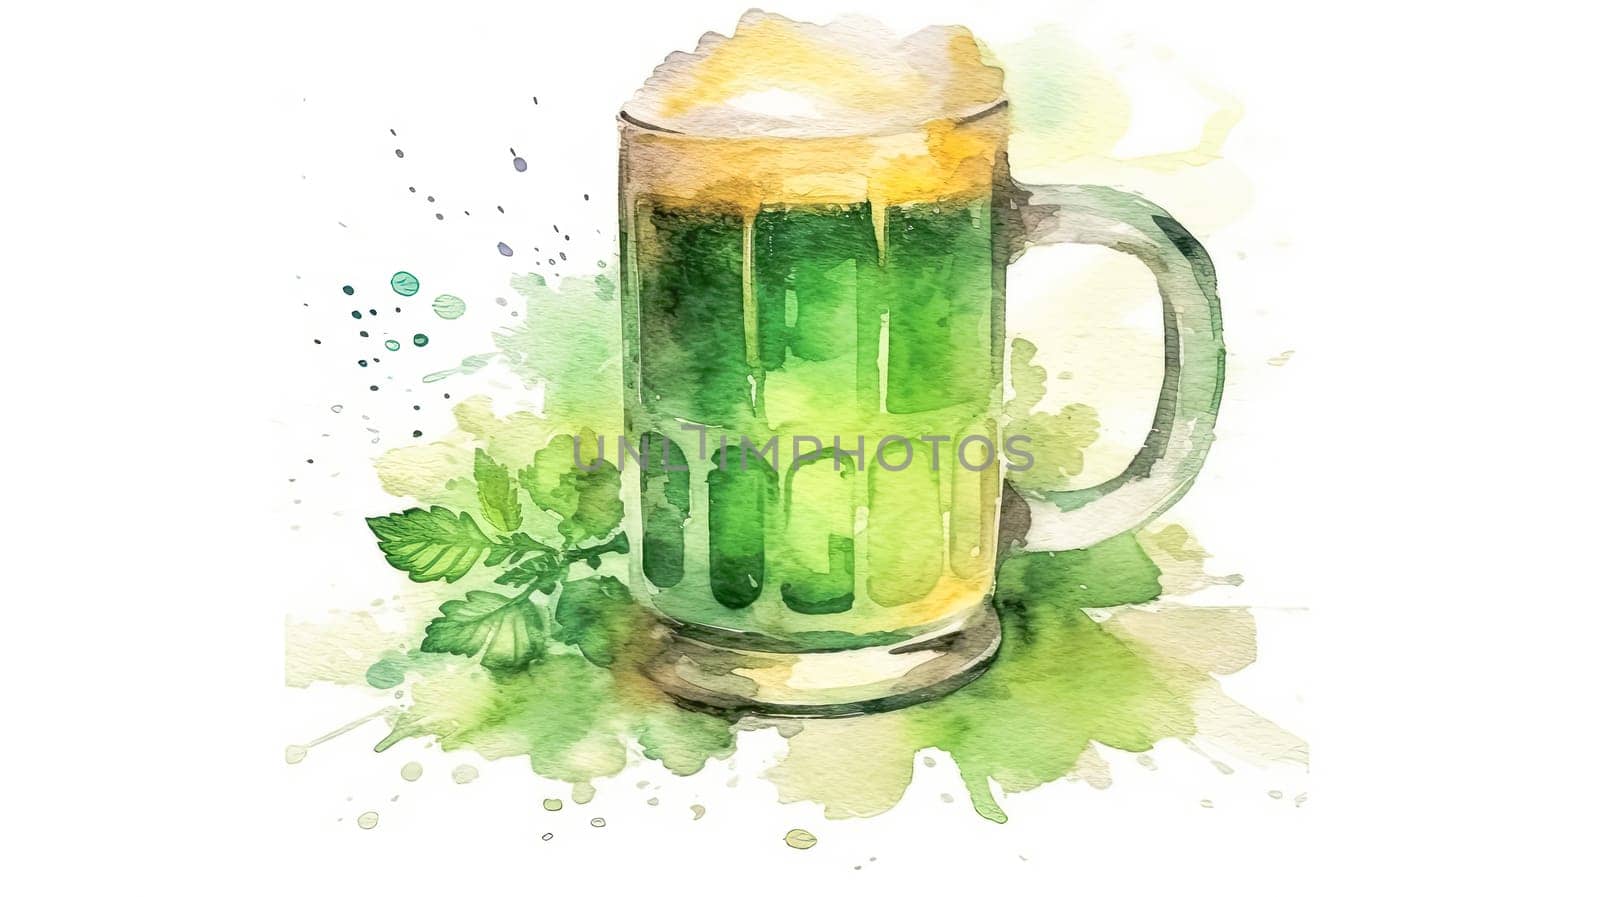 A delightful watercolor portrayal captures the essence of St. Patricks Day with a refreshing glass of green beer